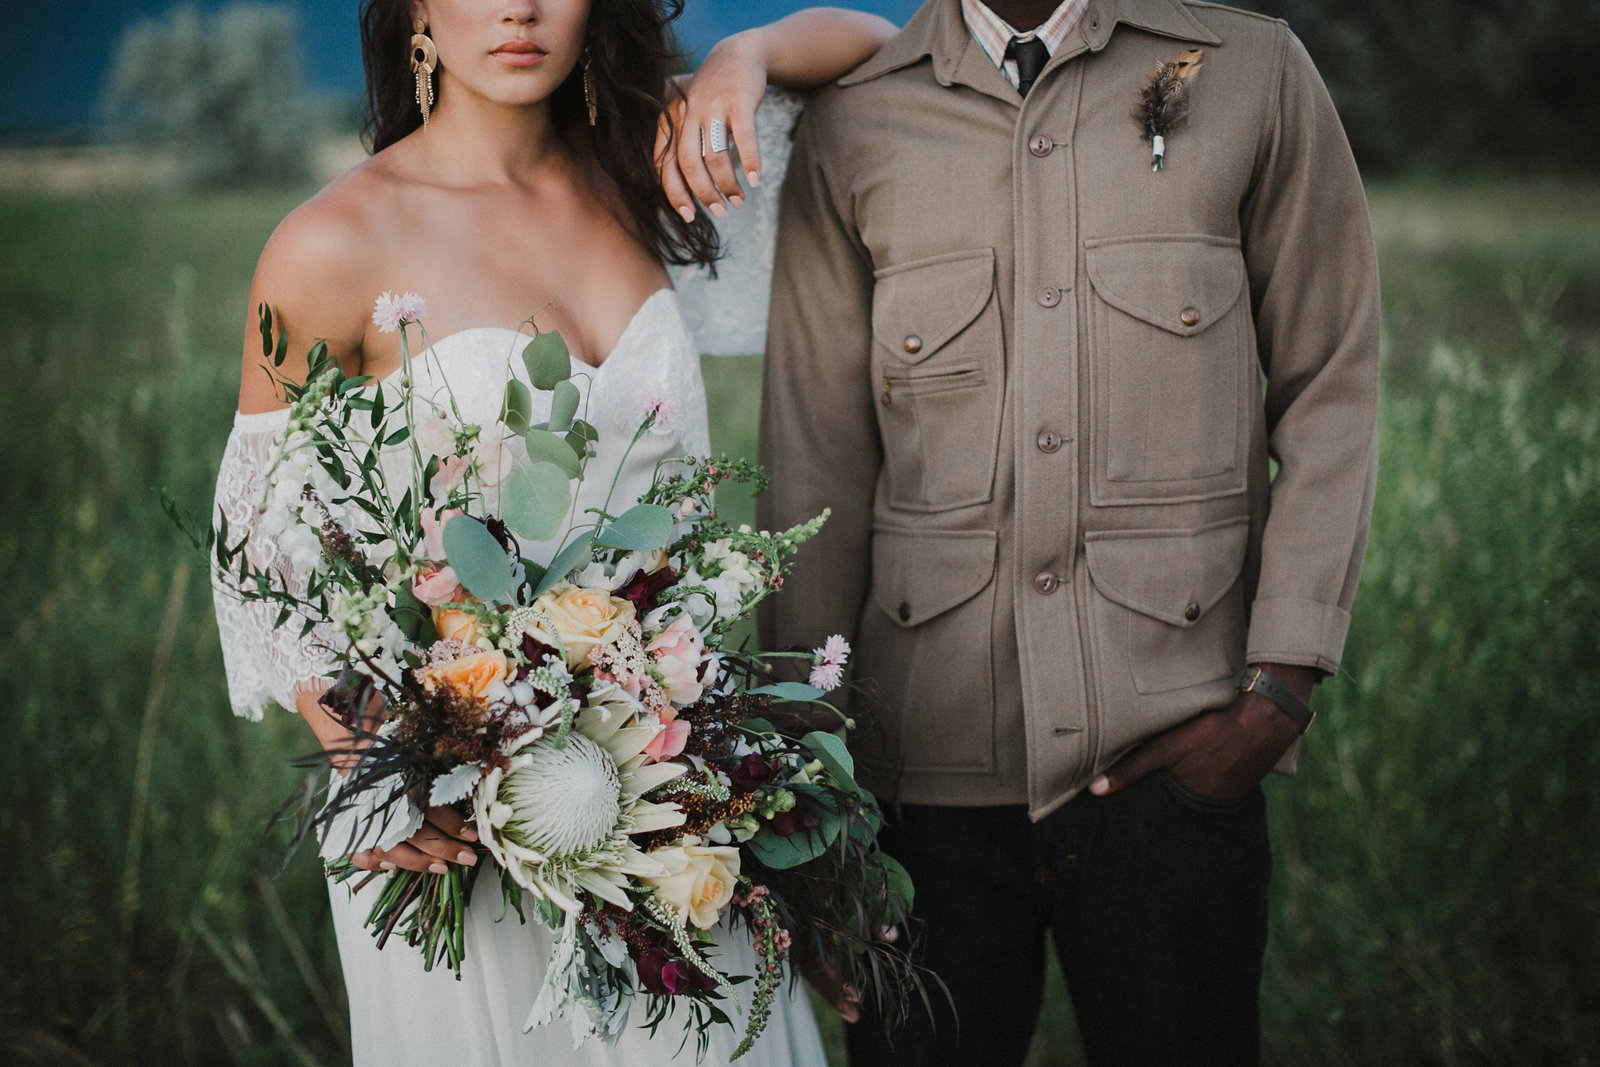 Boho inspired styled wedding shoot in Missoula, Montana, photographed by Sweetwater.